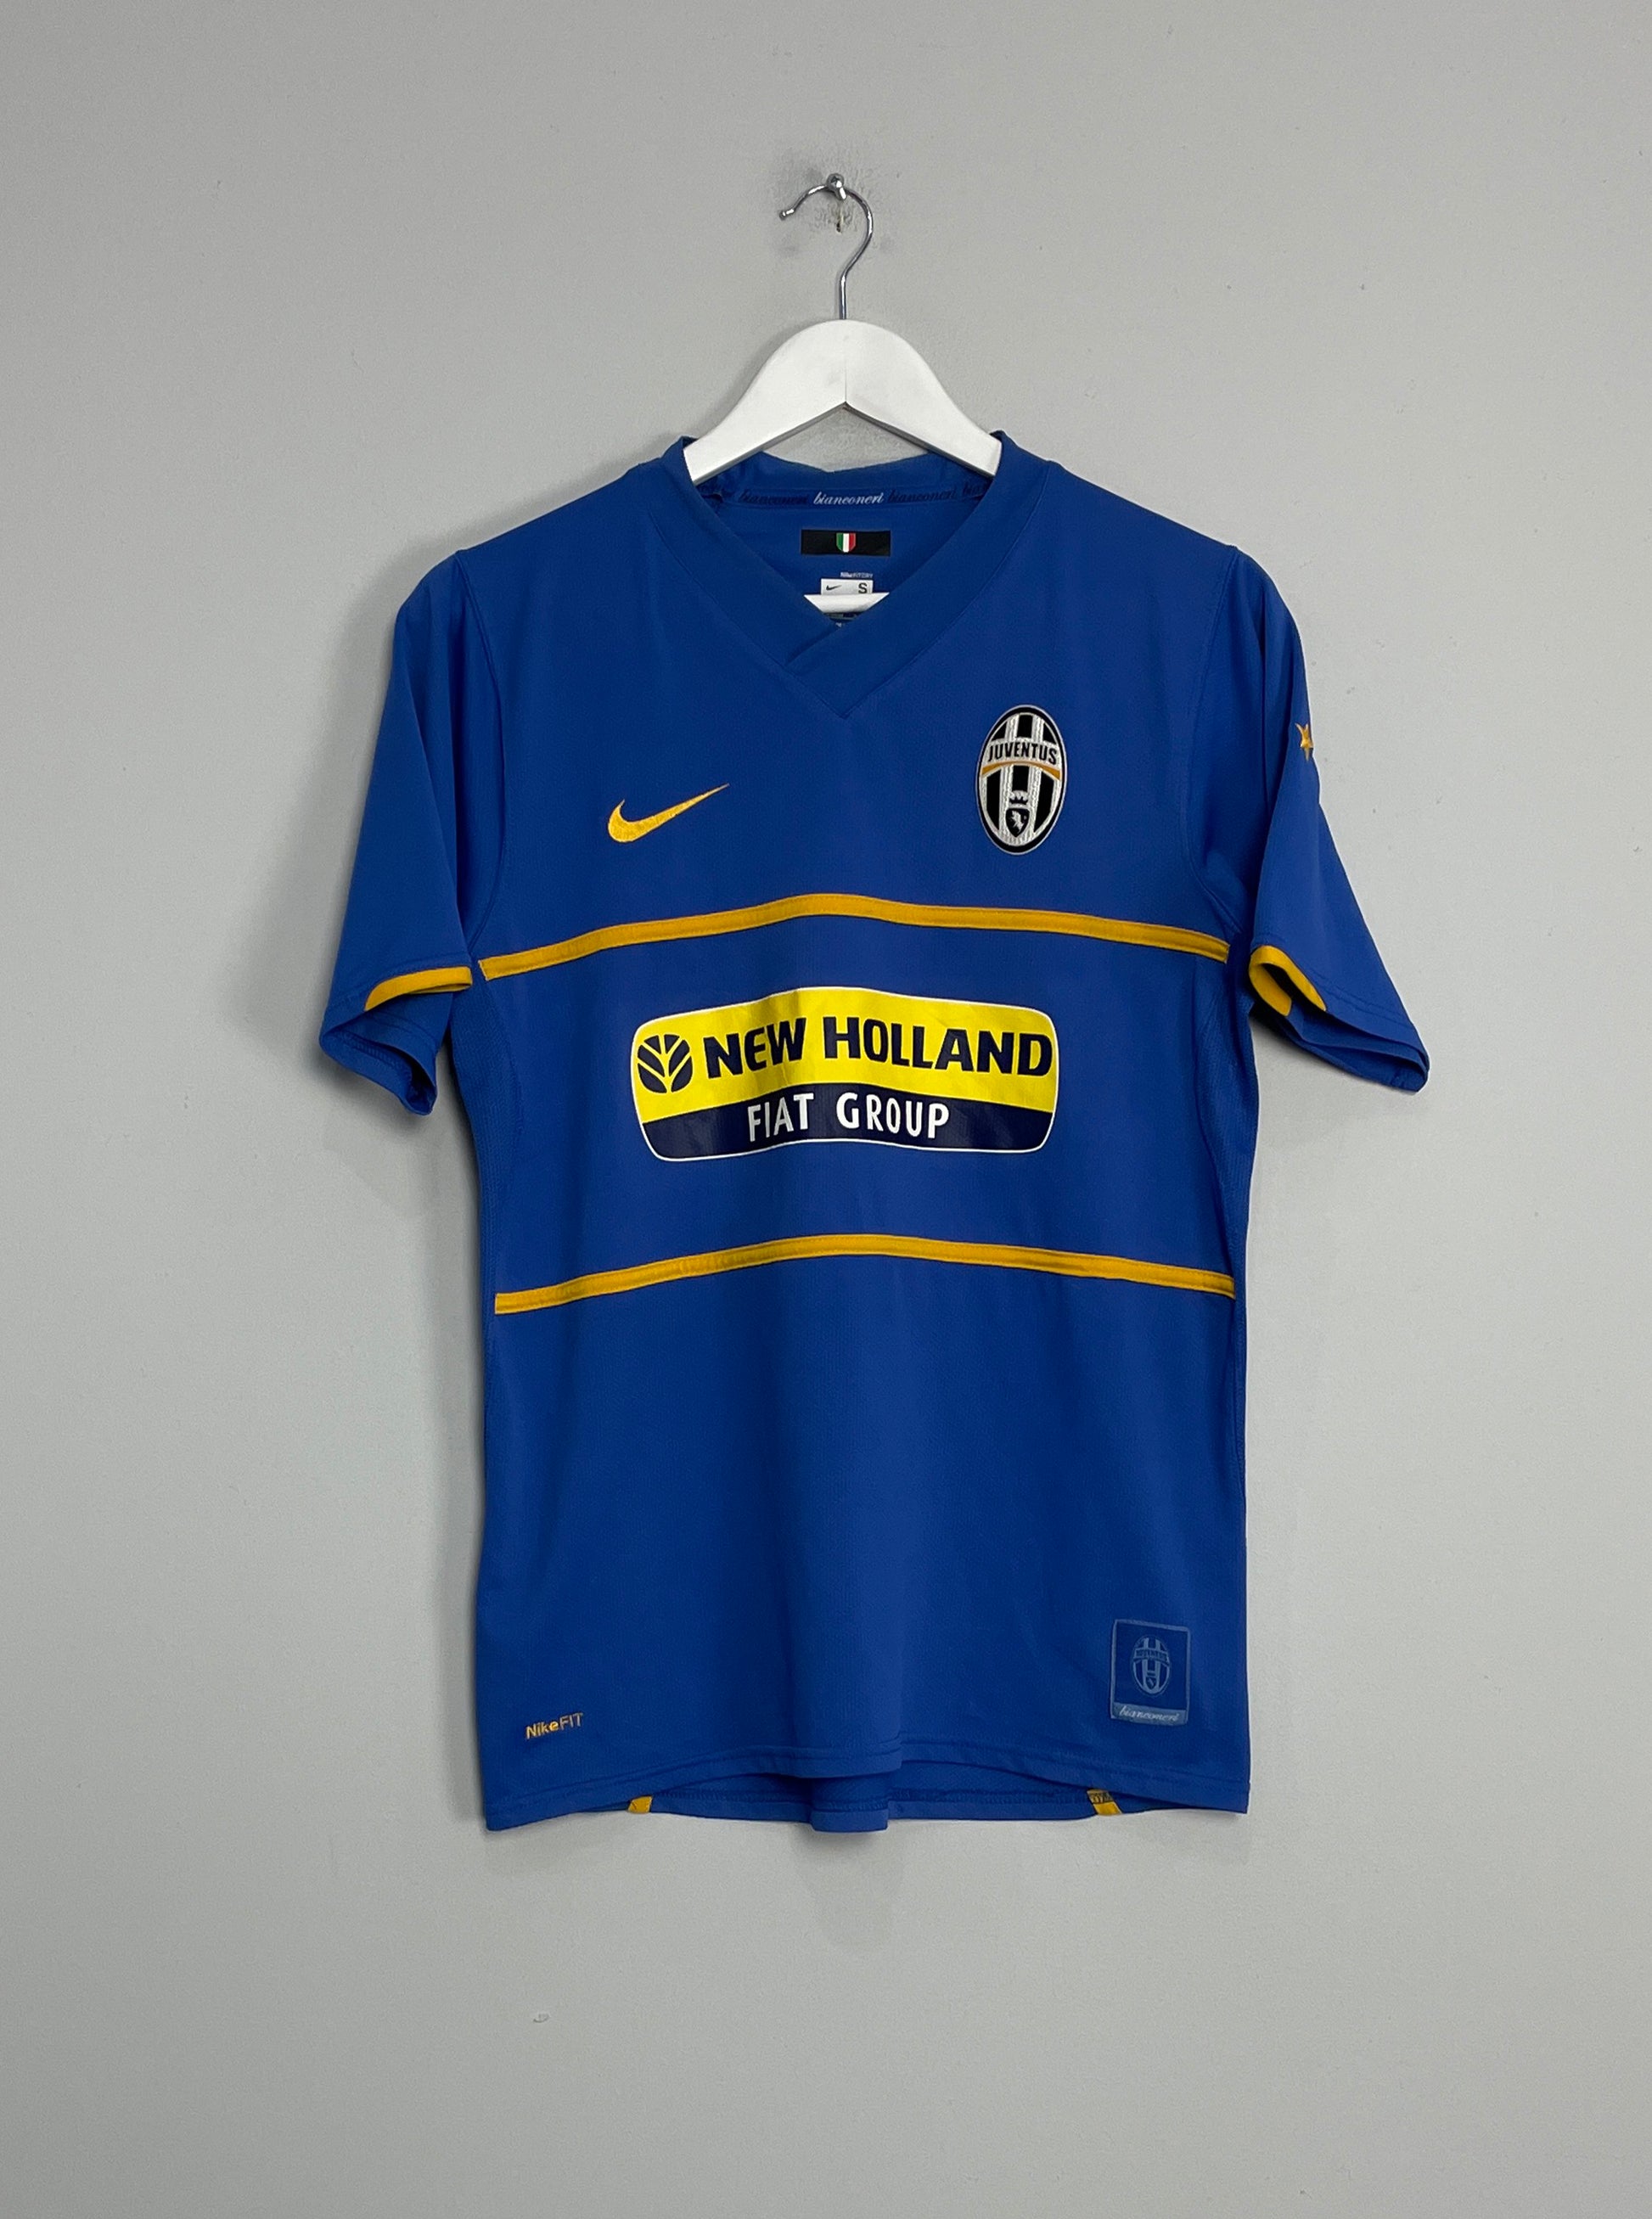 Image of the Juventus shirt from the 2007/08 season